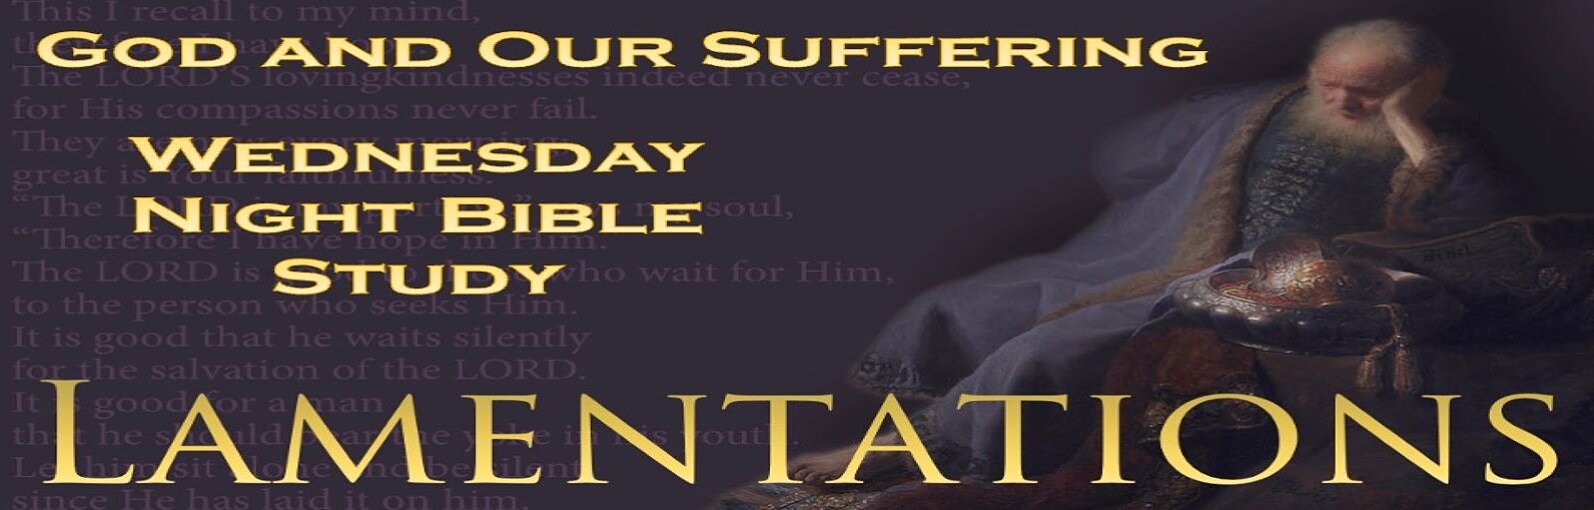 /images/r/lamentations-god-our-suffering-banner/c1594x510g1-0-1593-510/lamentations-god-our-suffering-banner.jpg